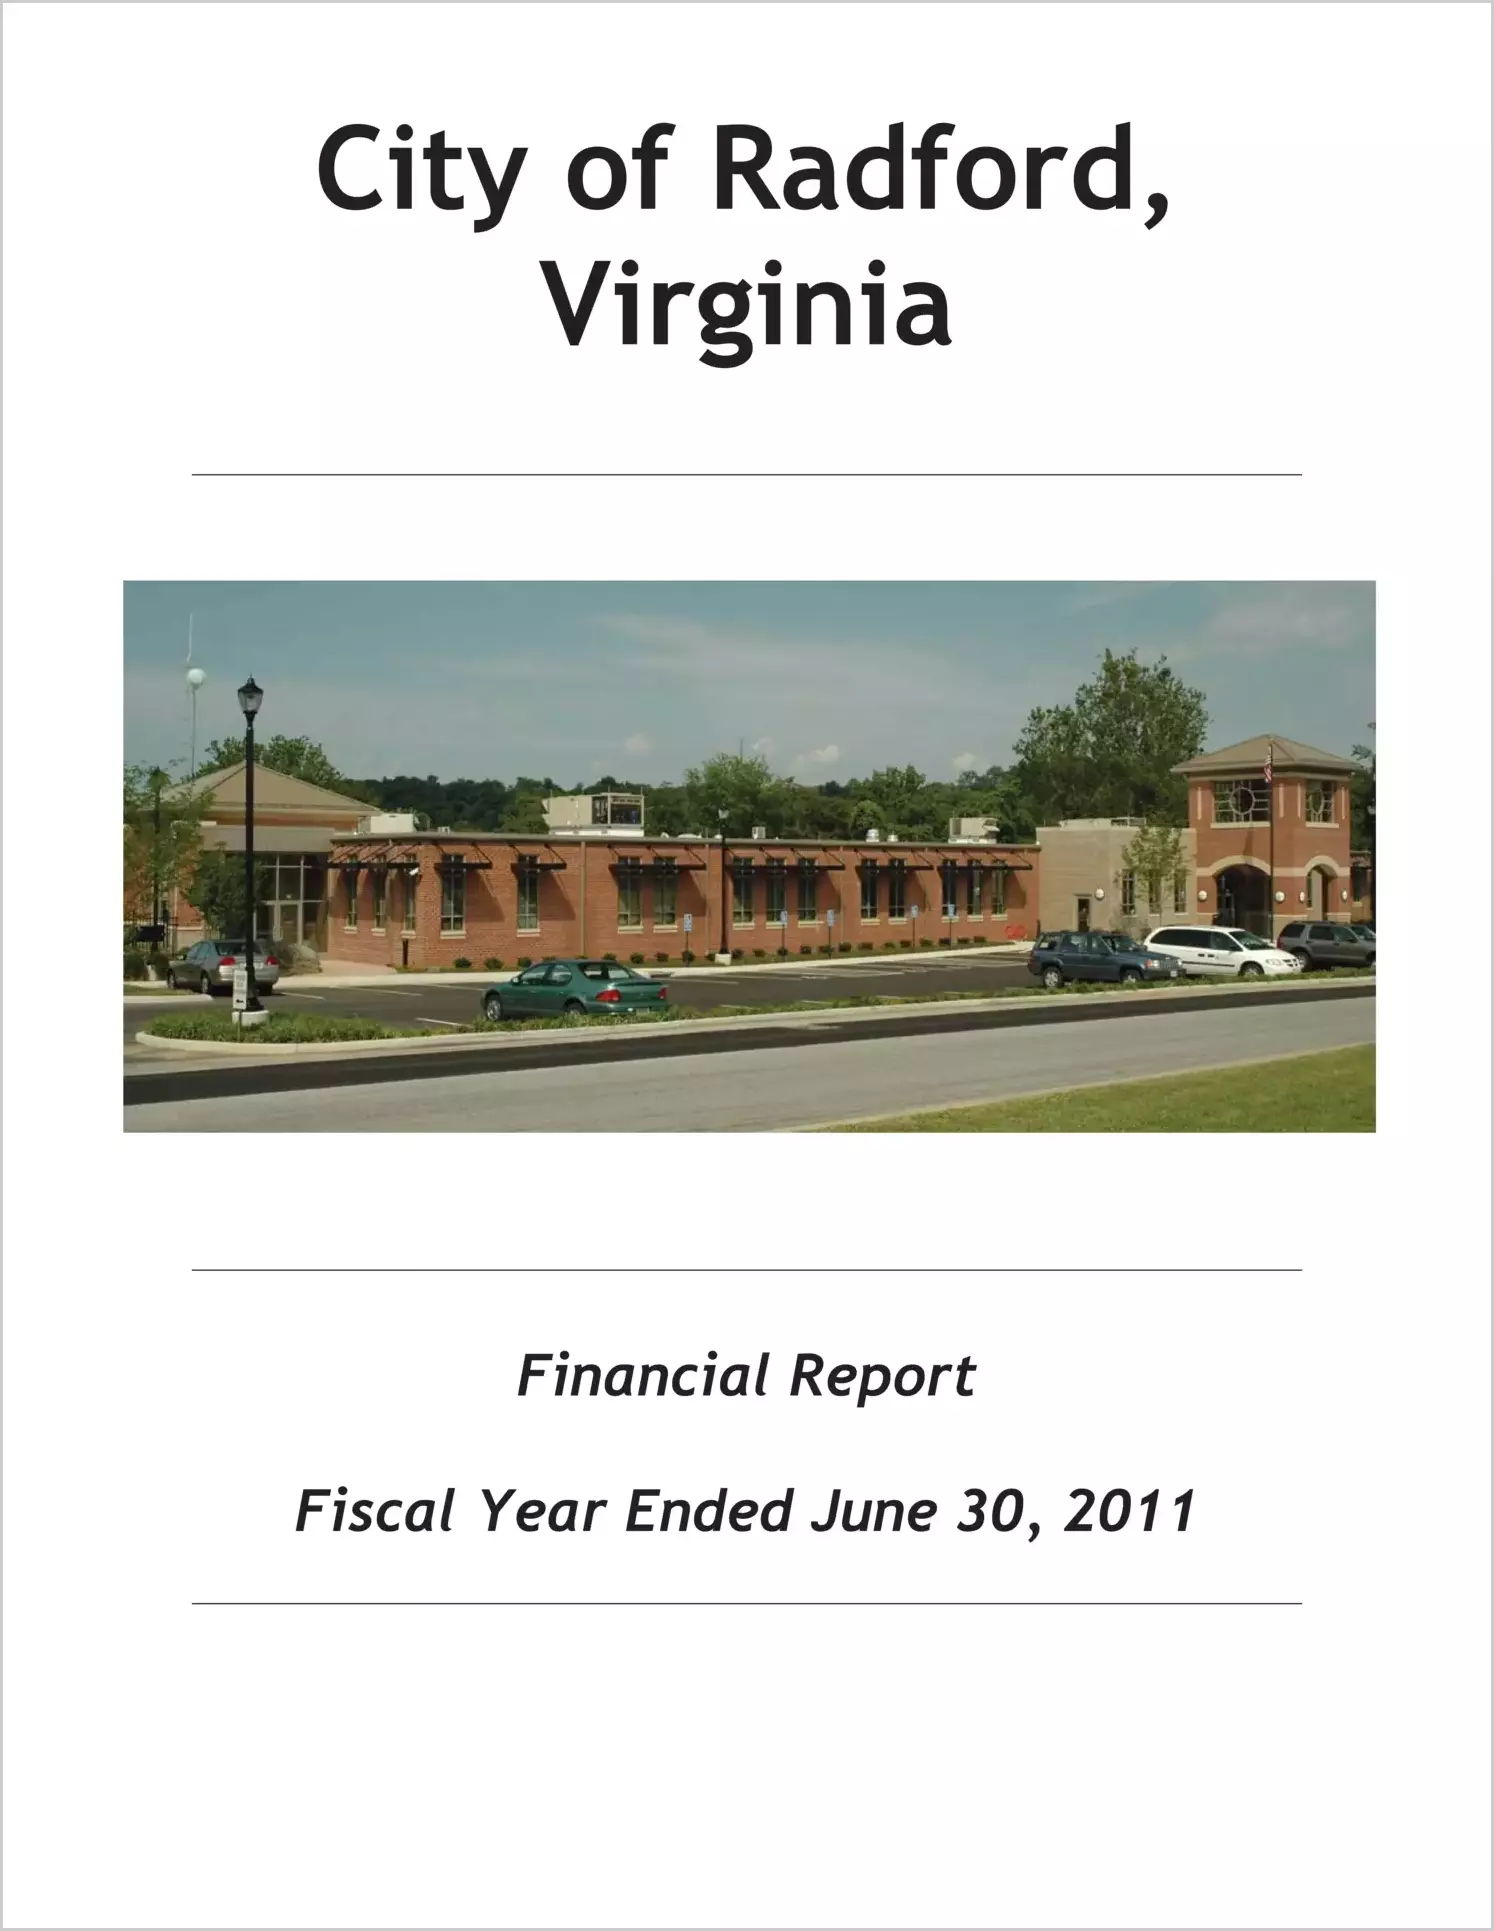 2011 Annual Financial Report for City of Radford